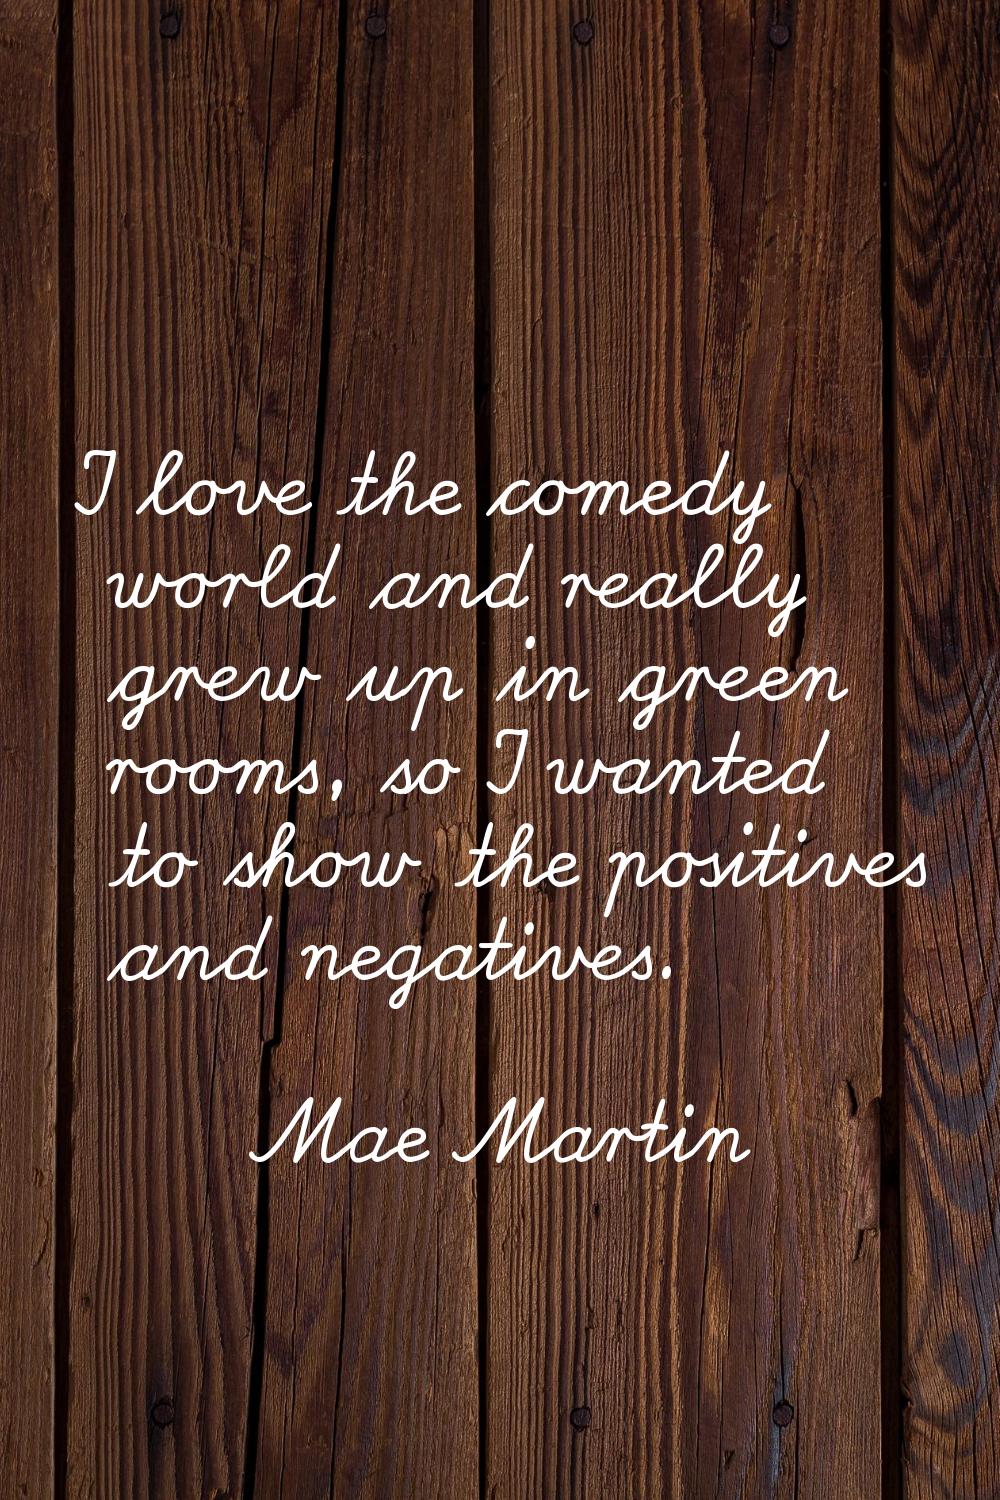 I love the comedy world and really grew up in green rooms, so I wanted to show the positives and ne